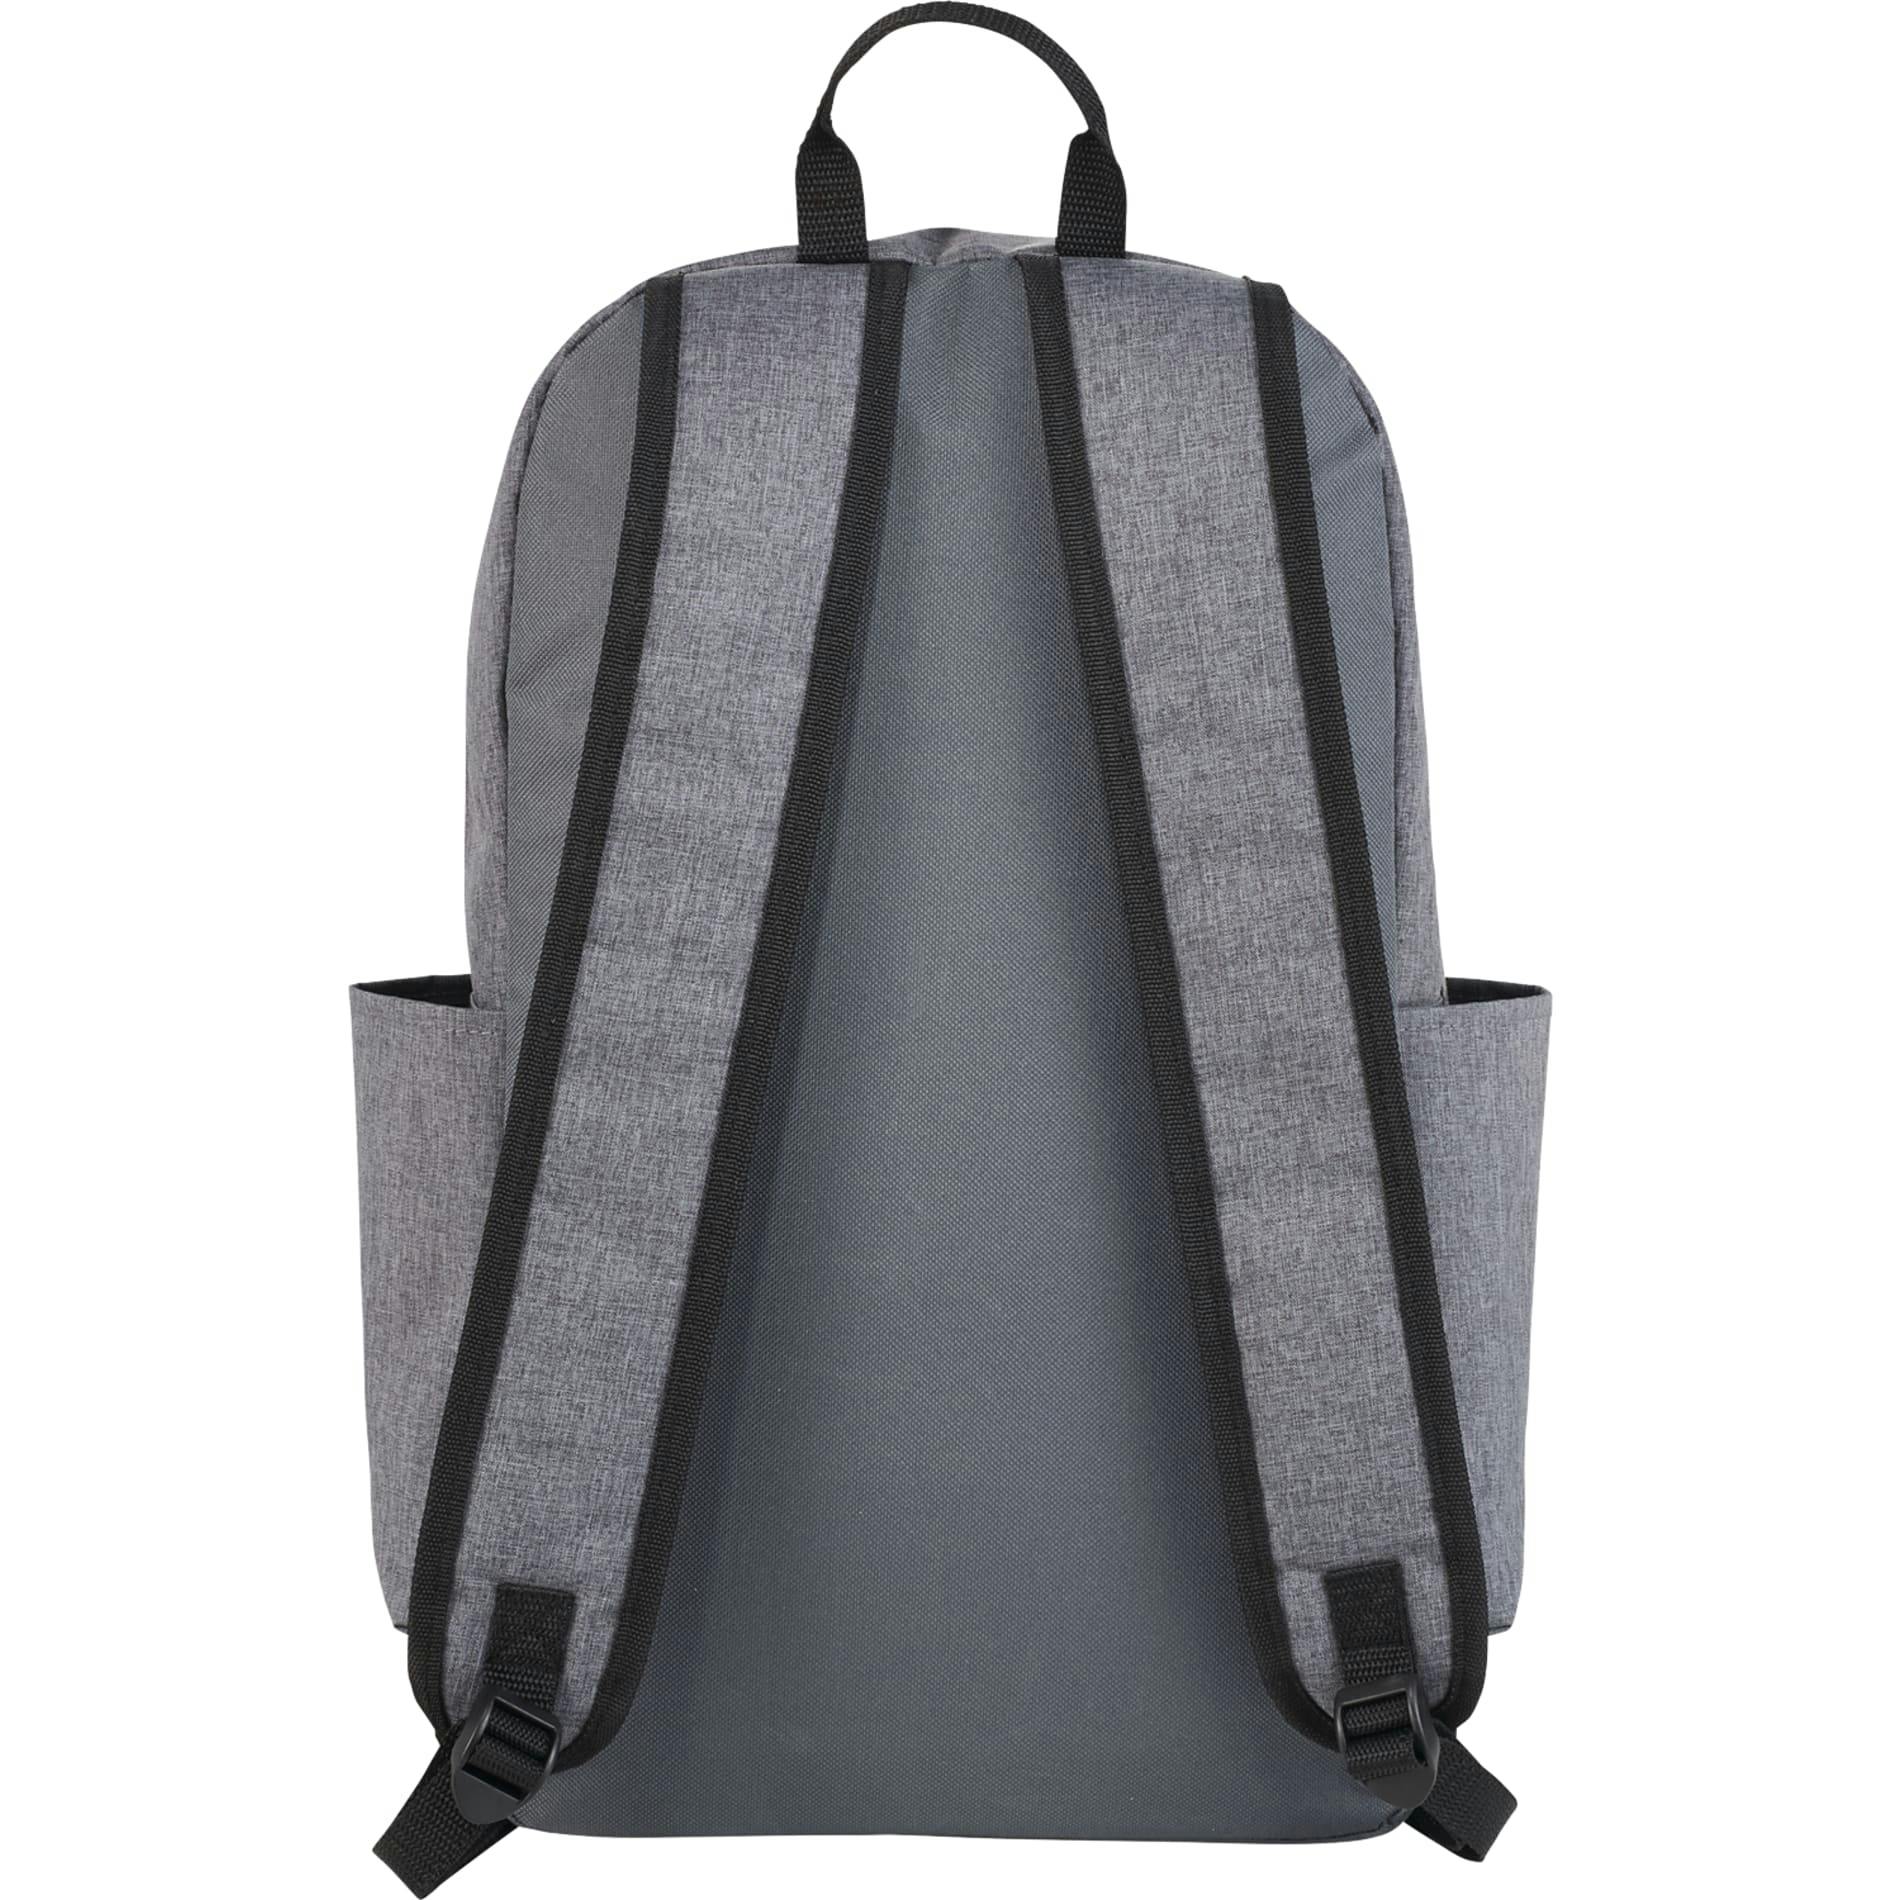 Grayson 15" Computer Backpack - additional Image 2